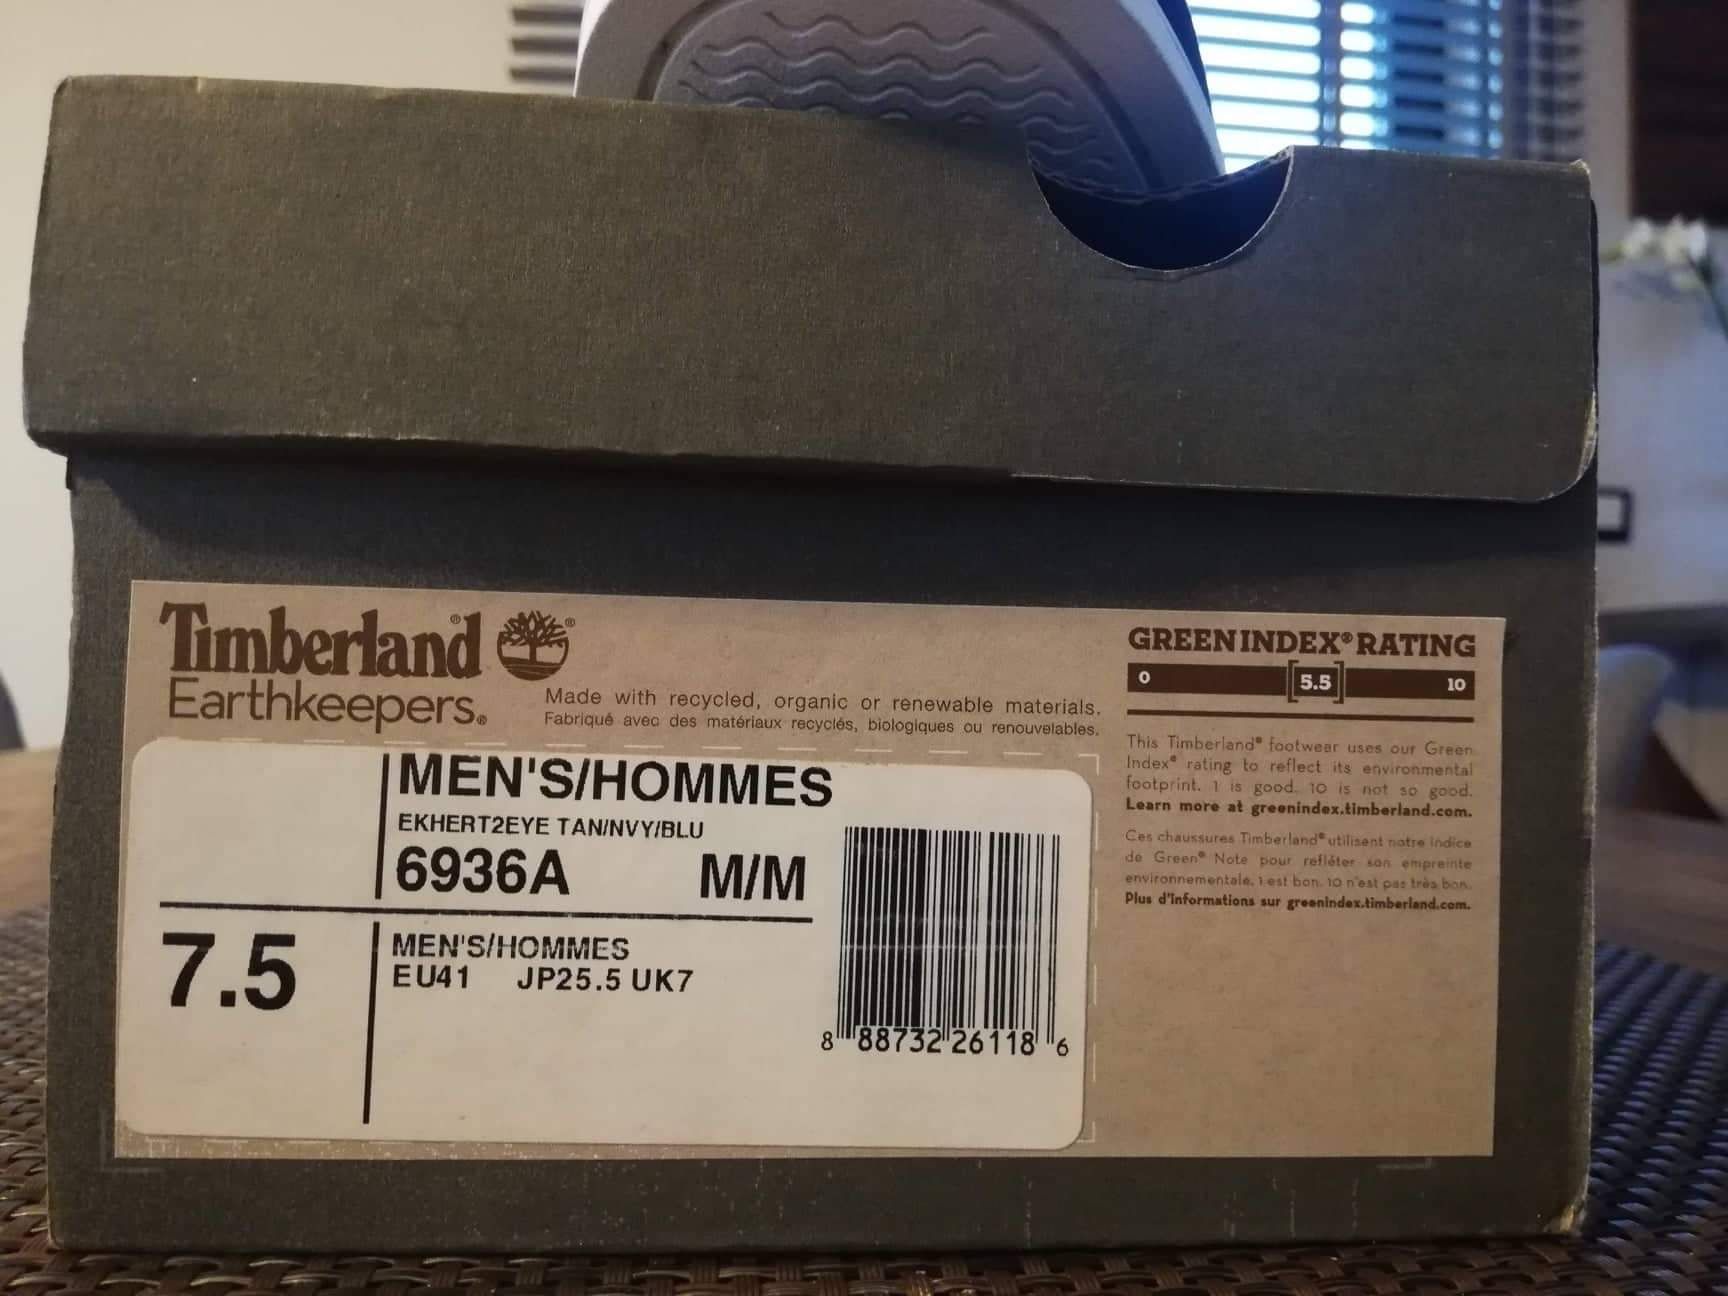 Buty Timberland boat shoes